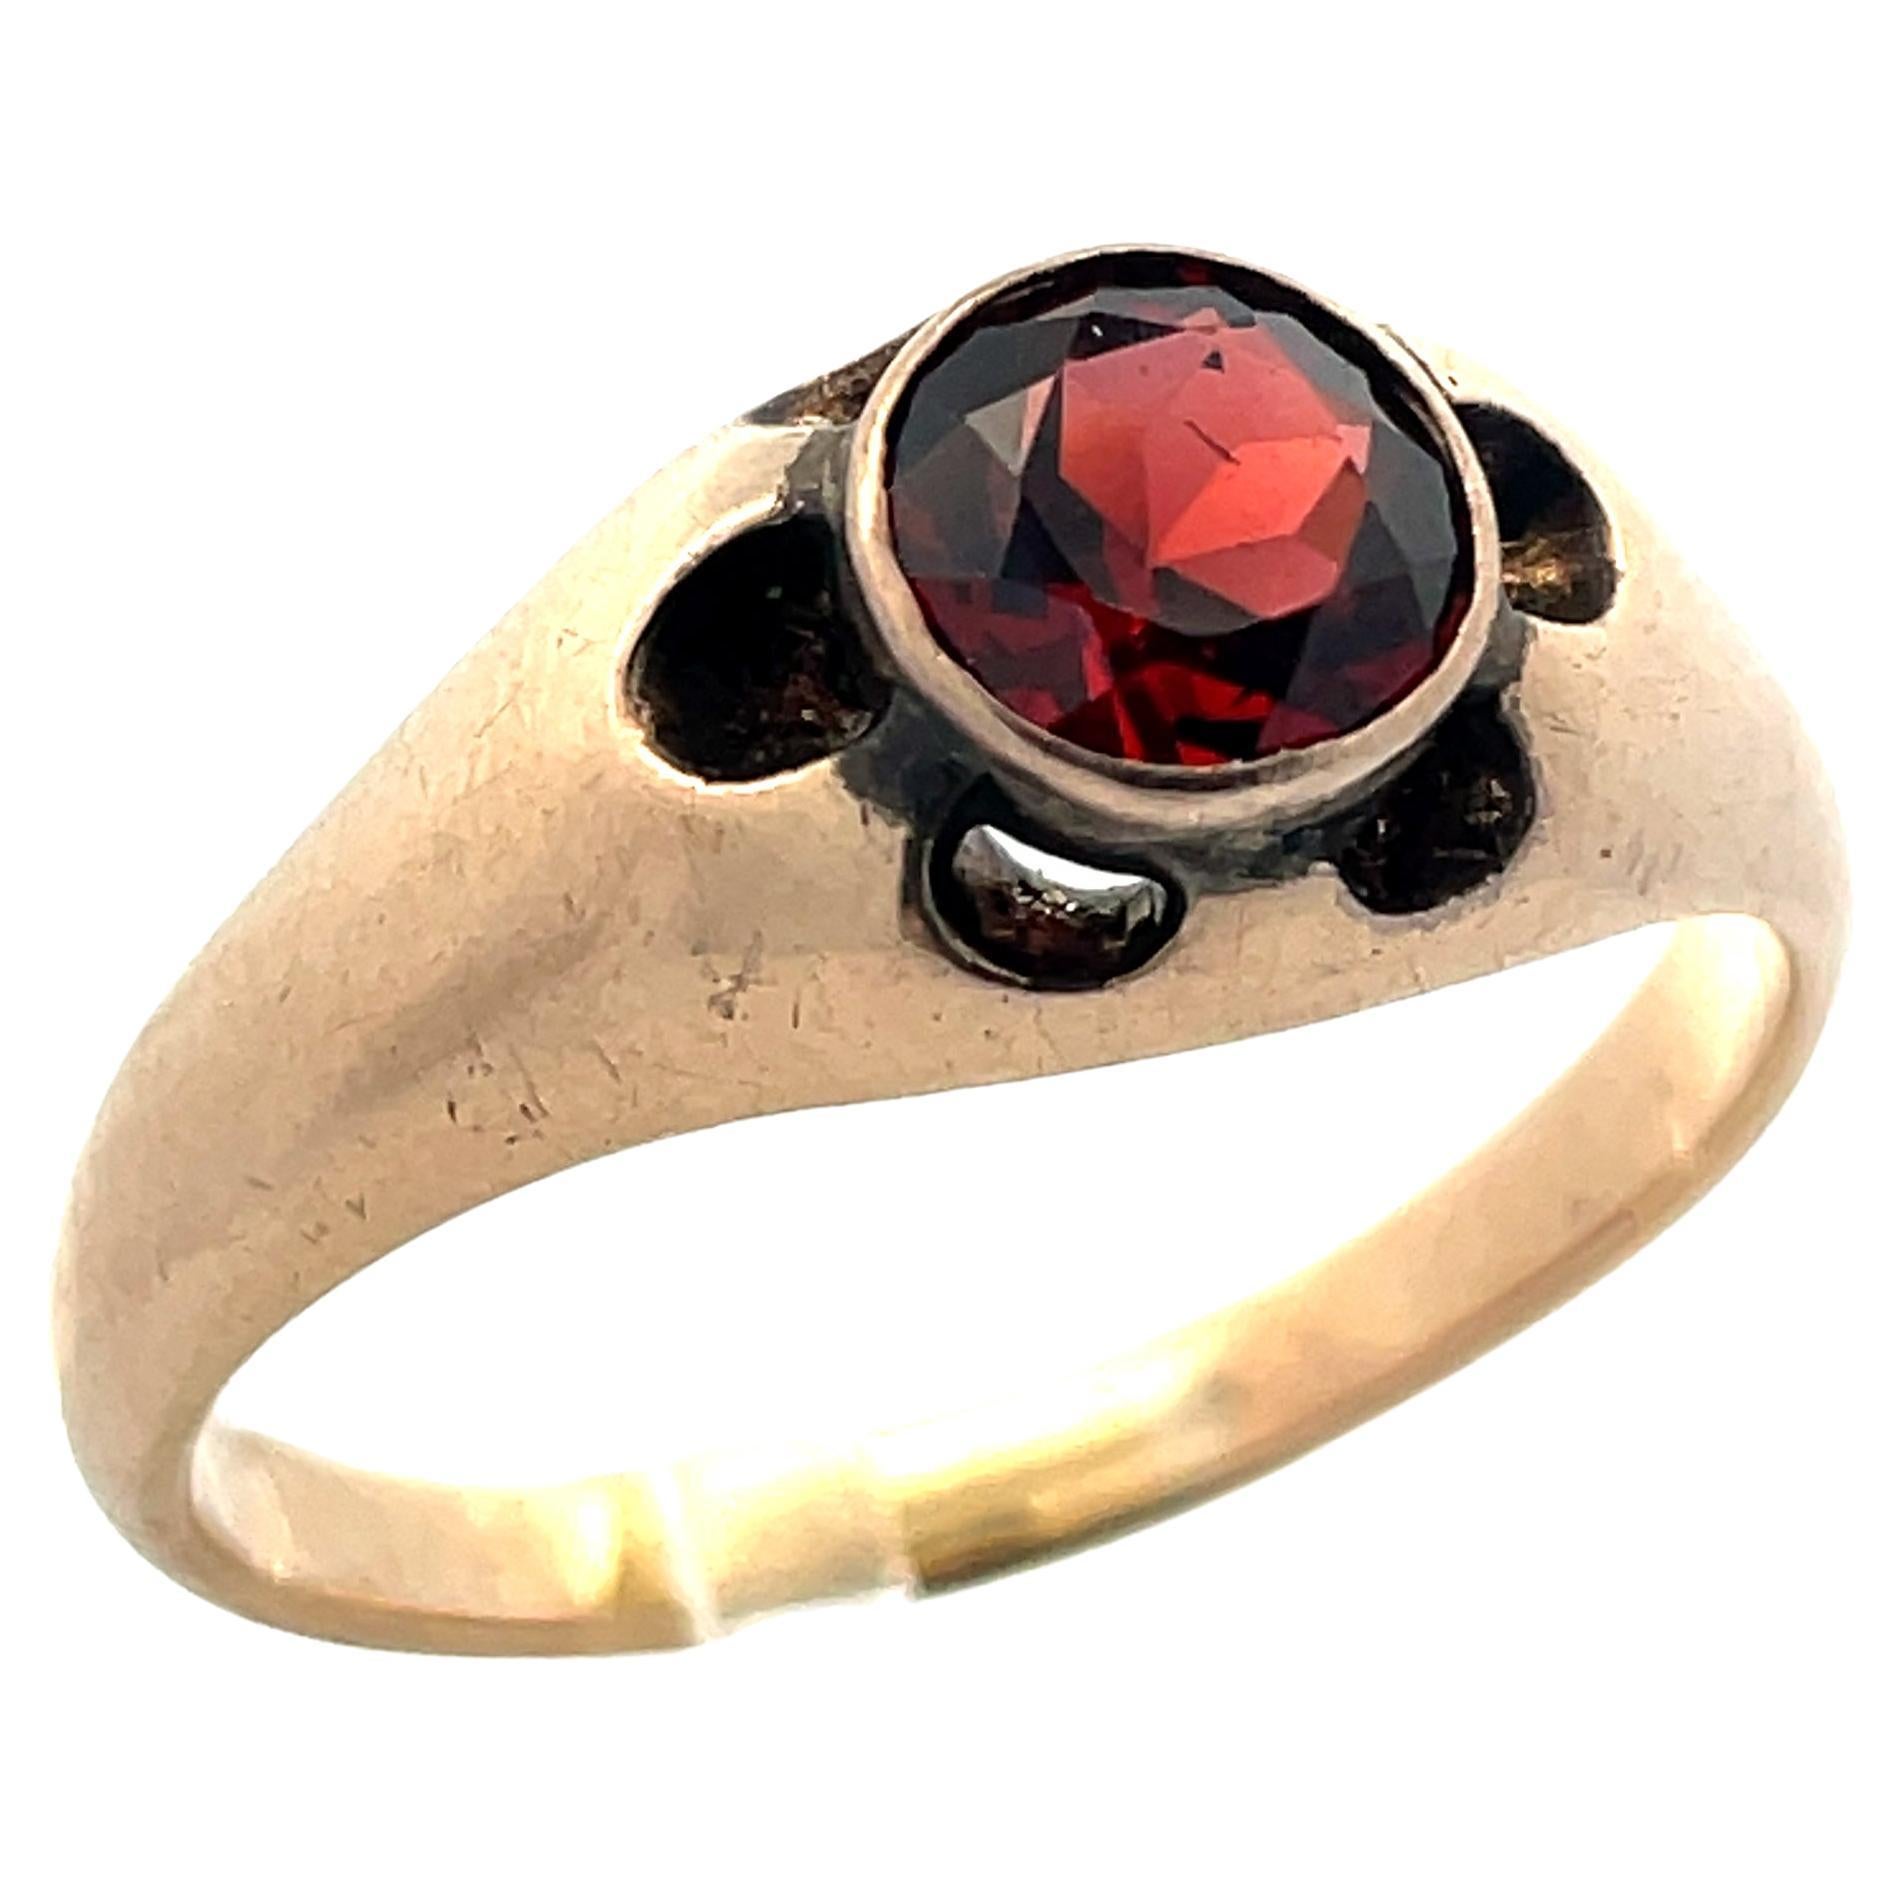 1890 Victorian 14K Yellow Gold Garnet Ring  For Sale